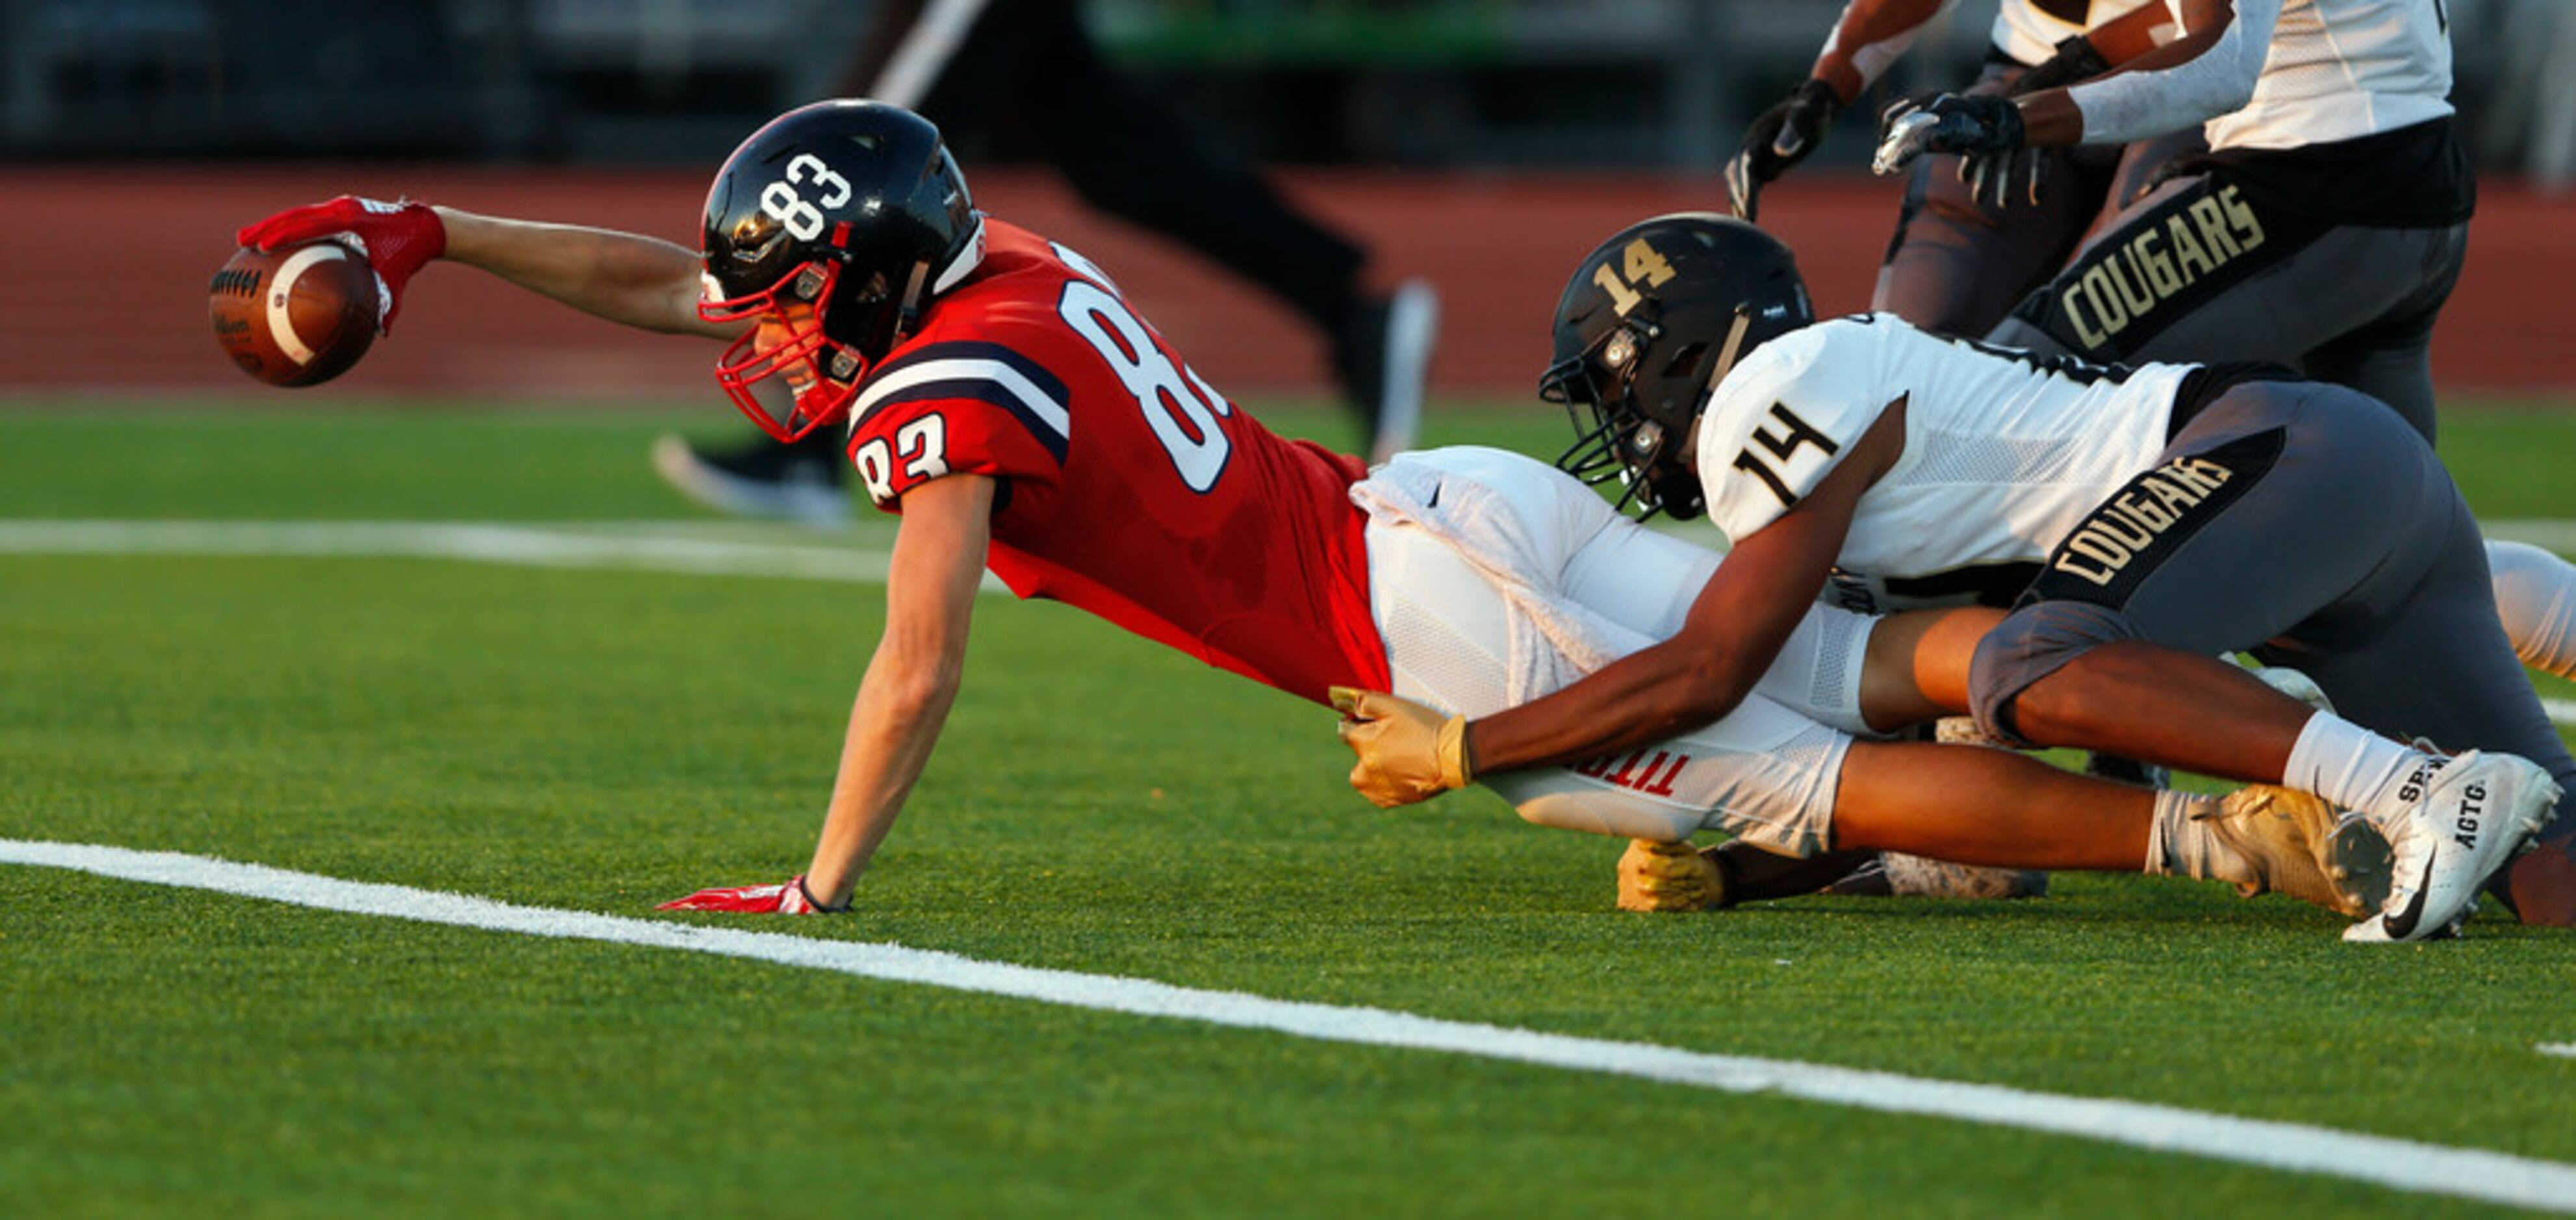 Centennial's Jacob McCoy (83) dives for the touchdown as The Colony's Stephen Wallak (14)...